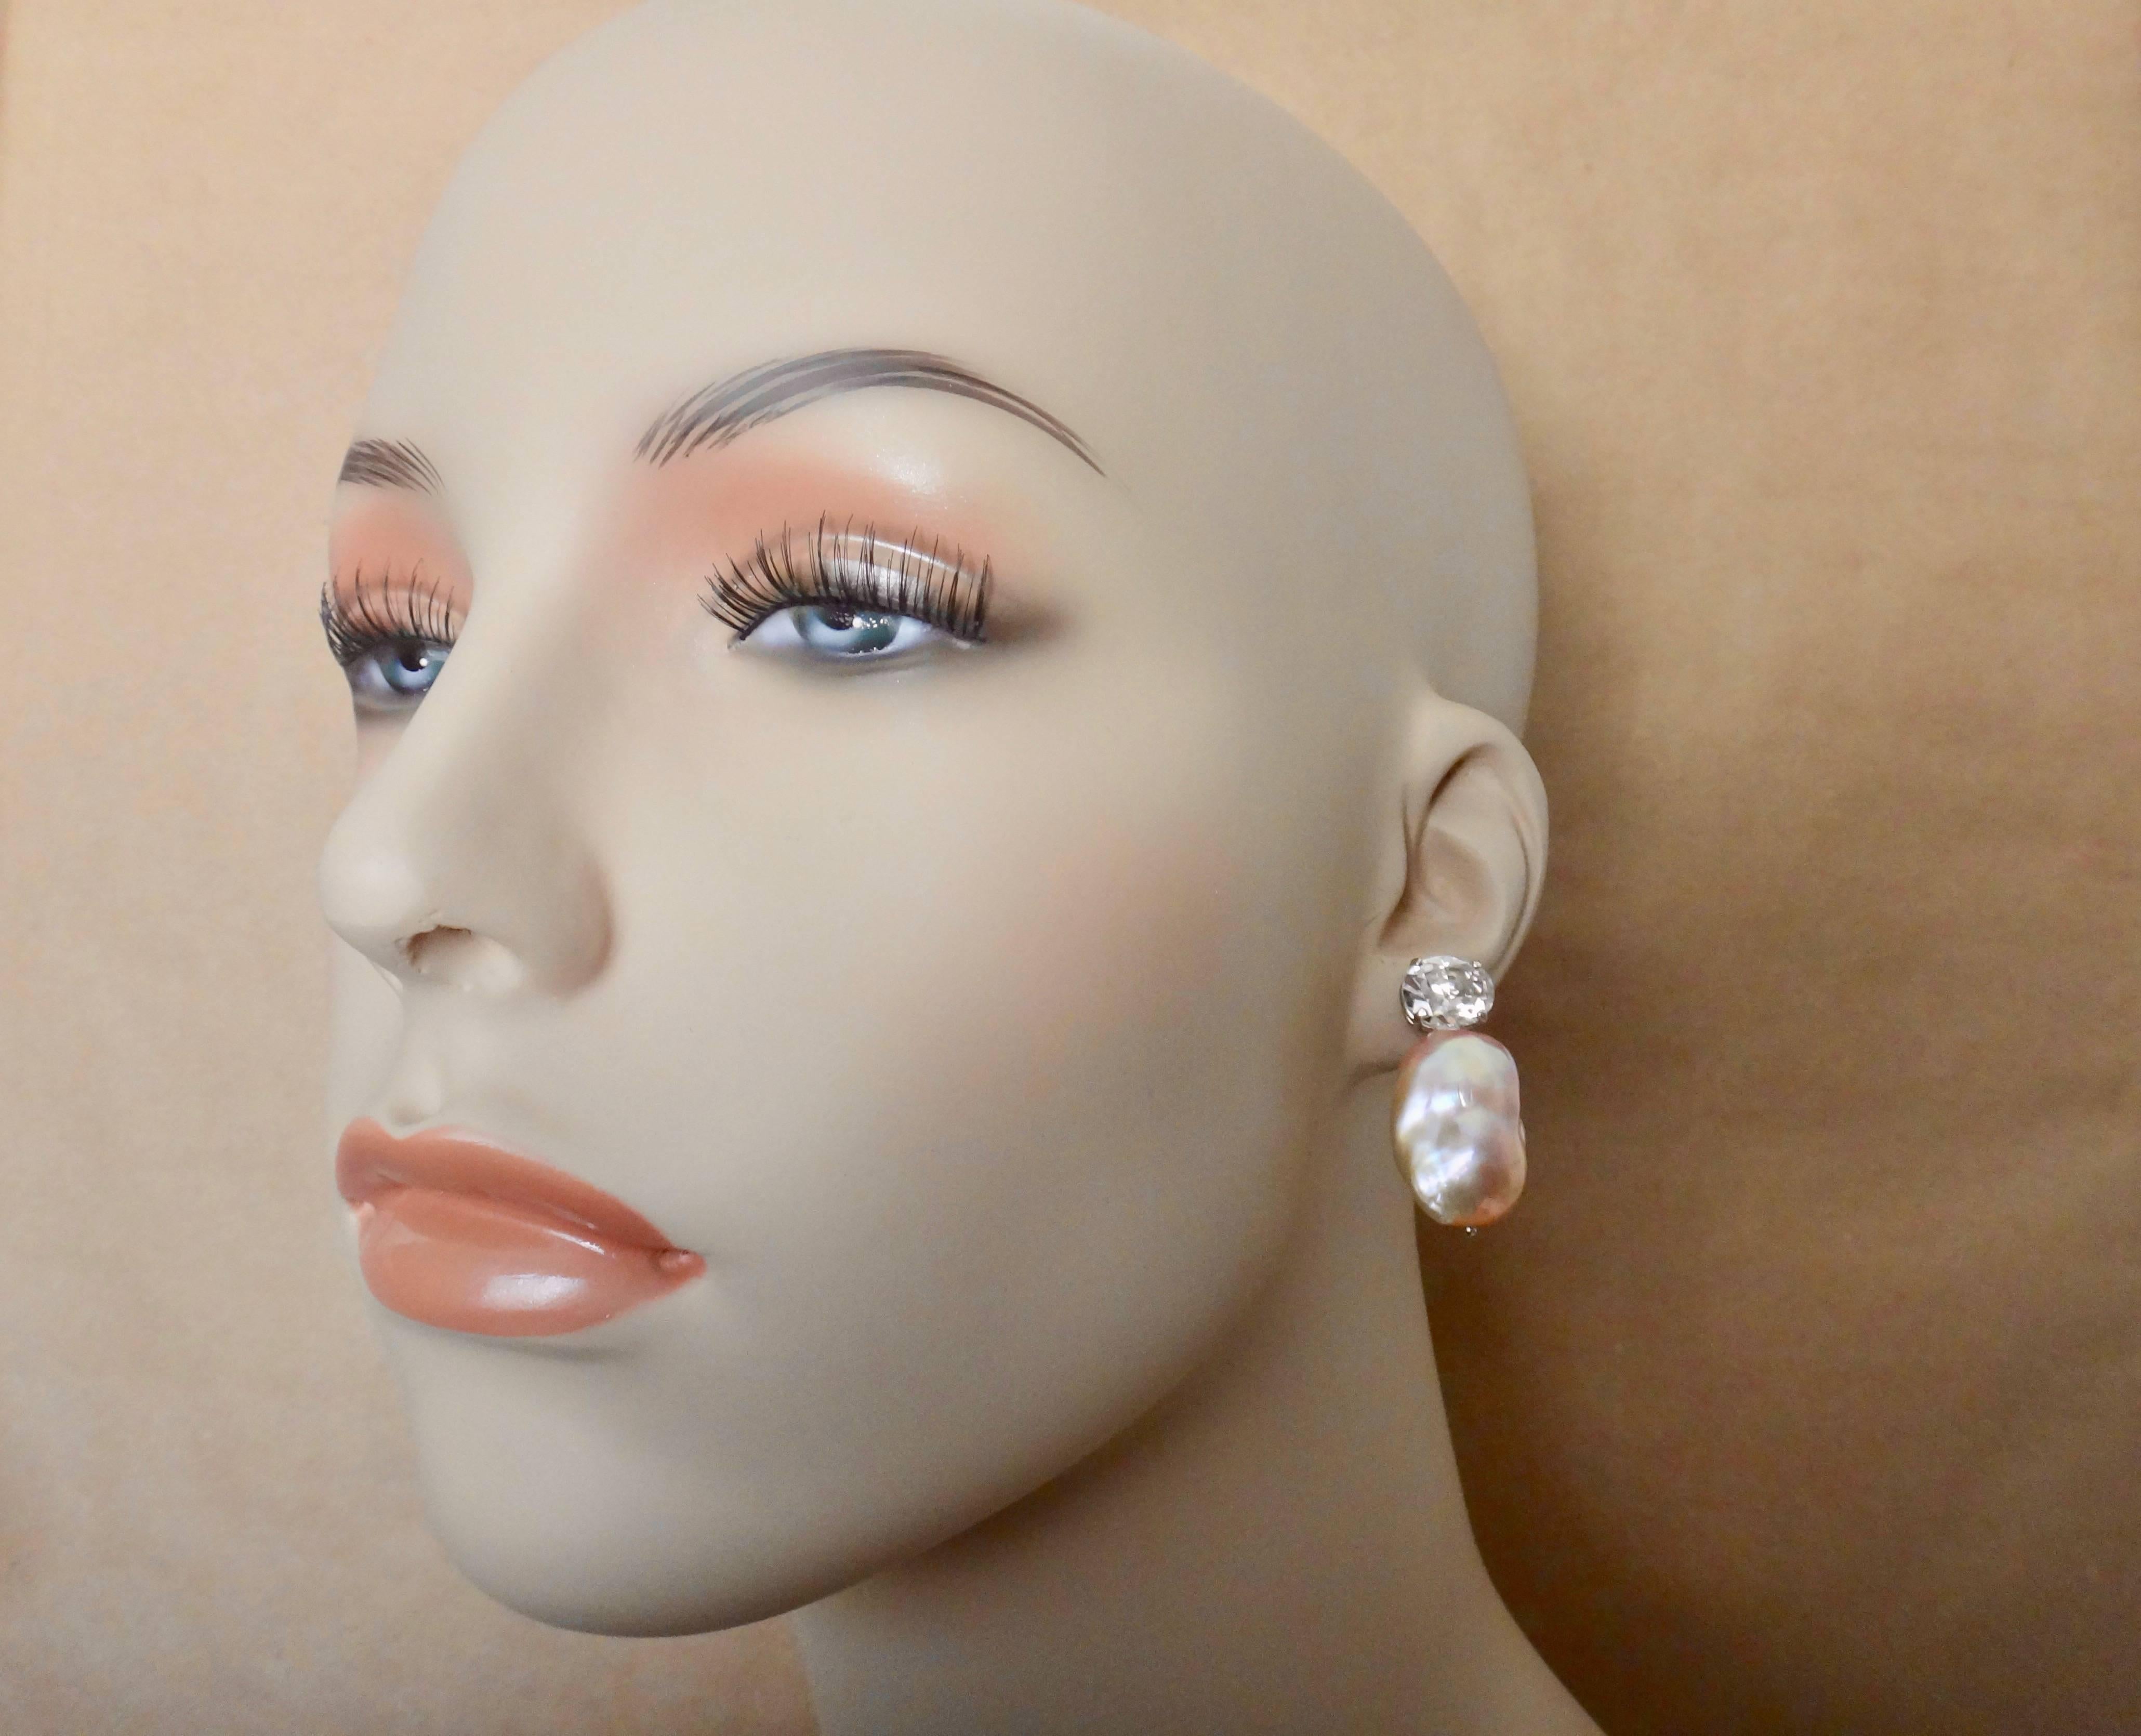 A substantial pair of pink cloud pearls are paired with oval cut platinum topaz in these classic drop earrings.  The pearls possess wonderful color and rich luster.  The gems are set in white gold.  The earrings come with posts and omega clip backs